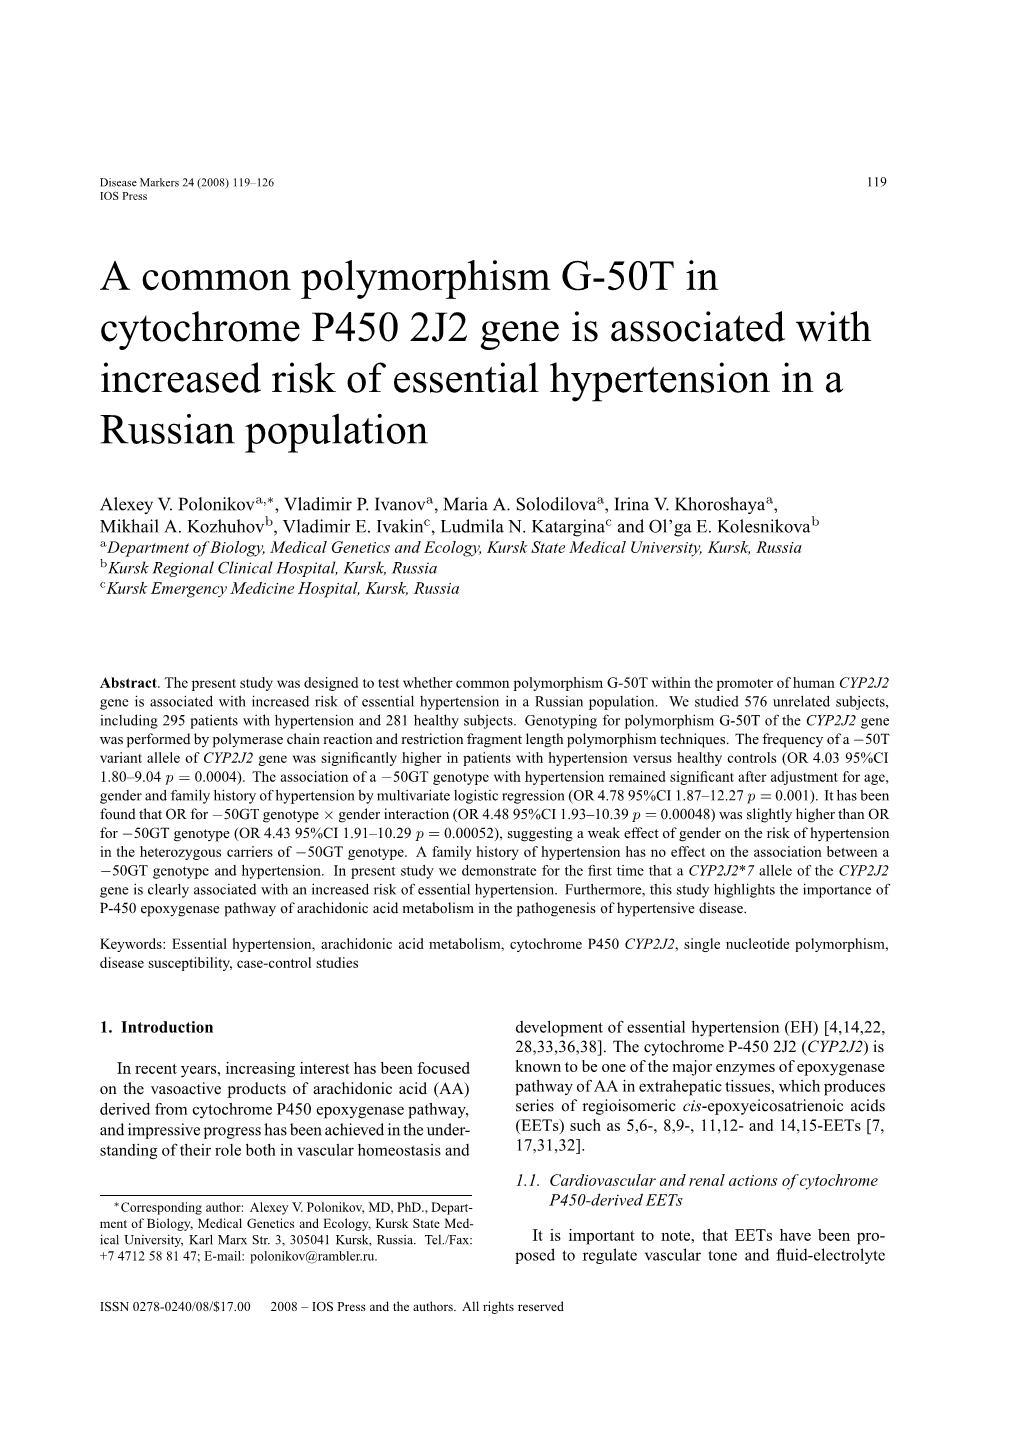 A Common Polymorphism G-50T in Cytochrome P450 2J2 Gene Is Associated with Increased Risk of Essential Hypertension in a Russian Population